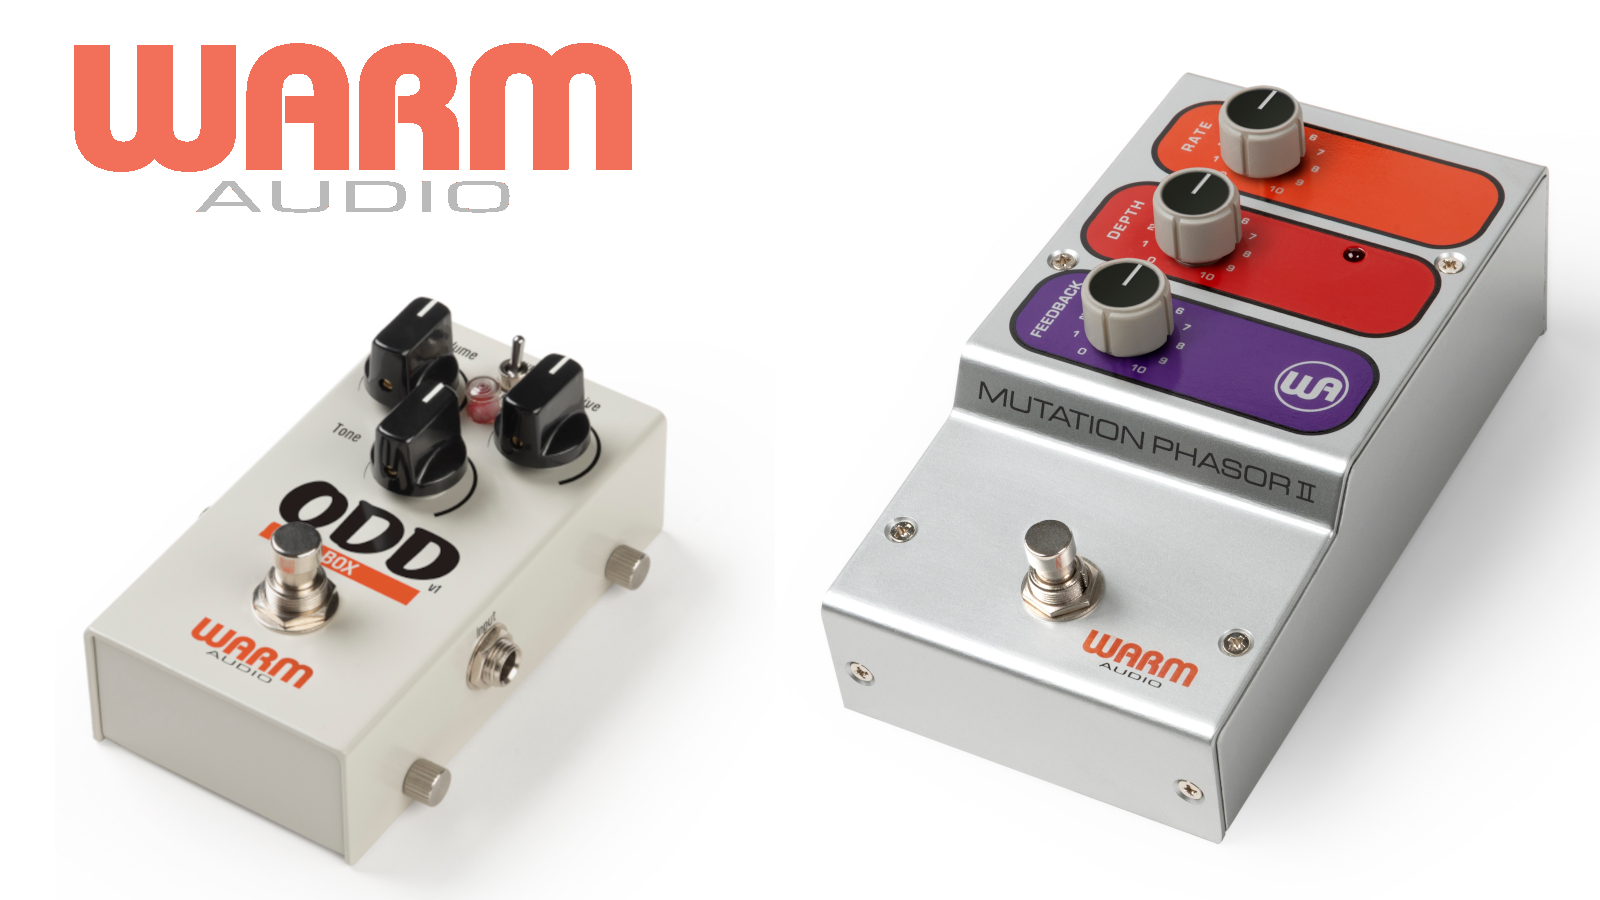 Warm Audio Releases the ODD Box V1 and Mutation Phasor II 